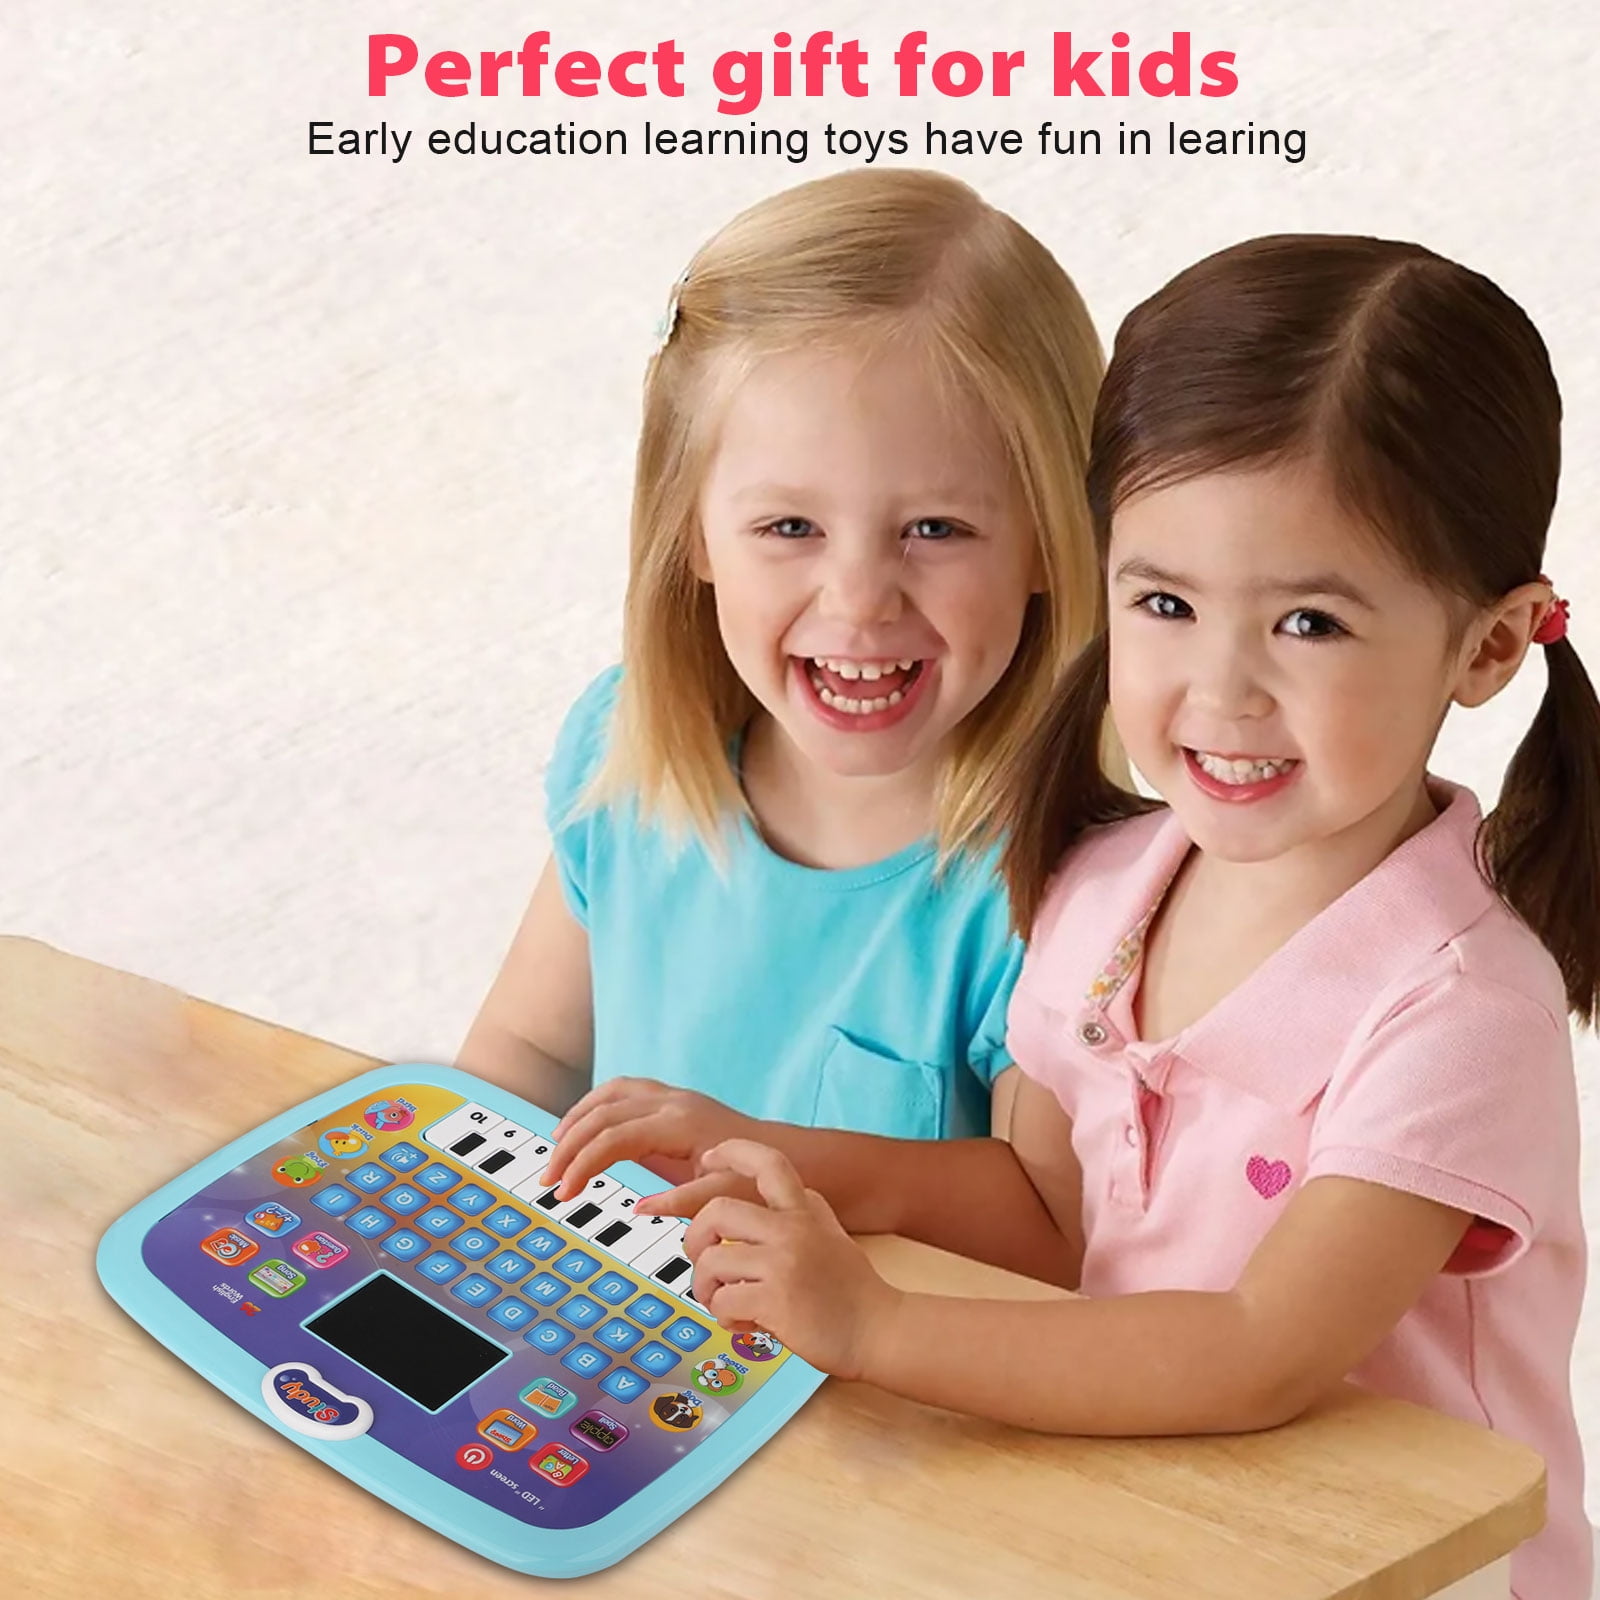 Muito Bom New English Cartoon Early Childhood Education Tablet LED Screen  Kid's Learning Machine Toy Ipaid Birthday Gift